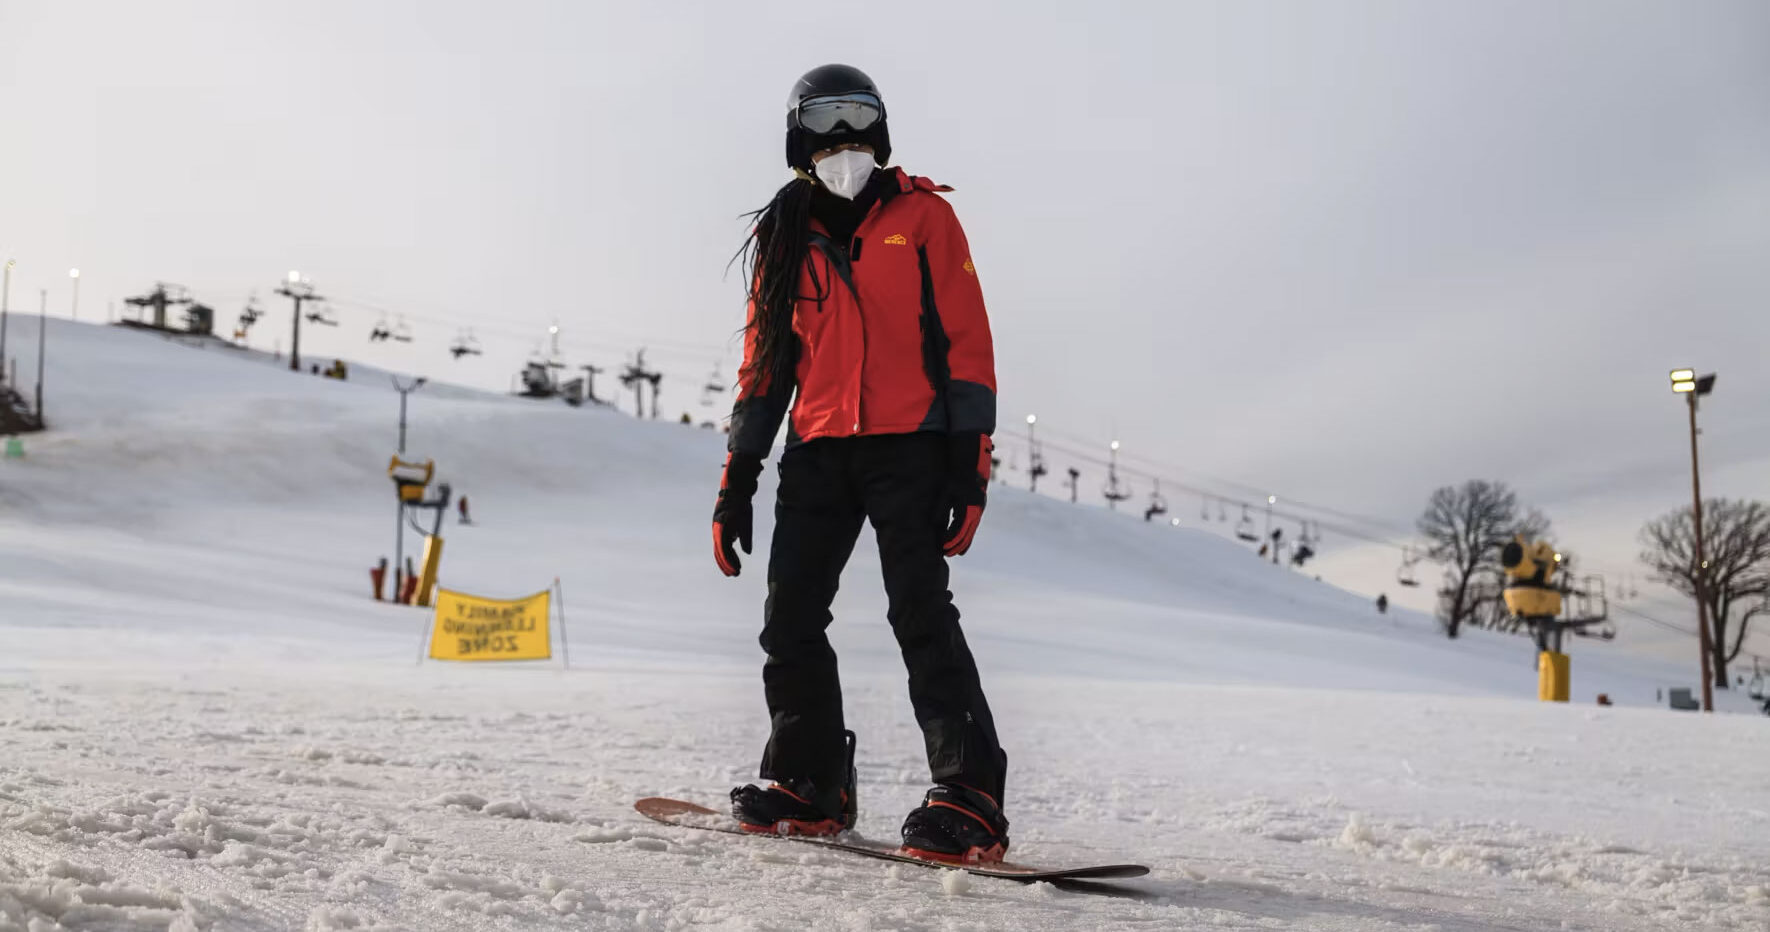 Girl snowboarding wearing red jacket and black pants